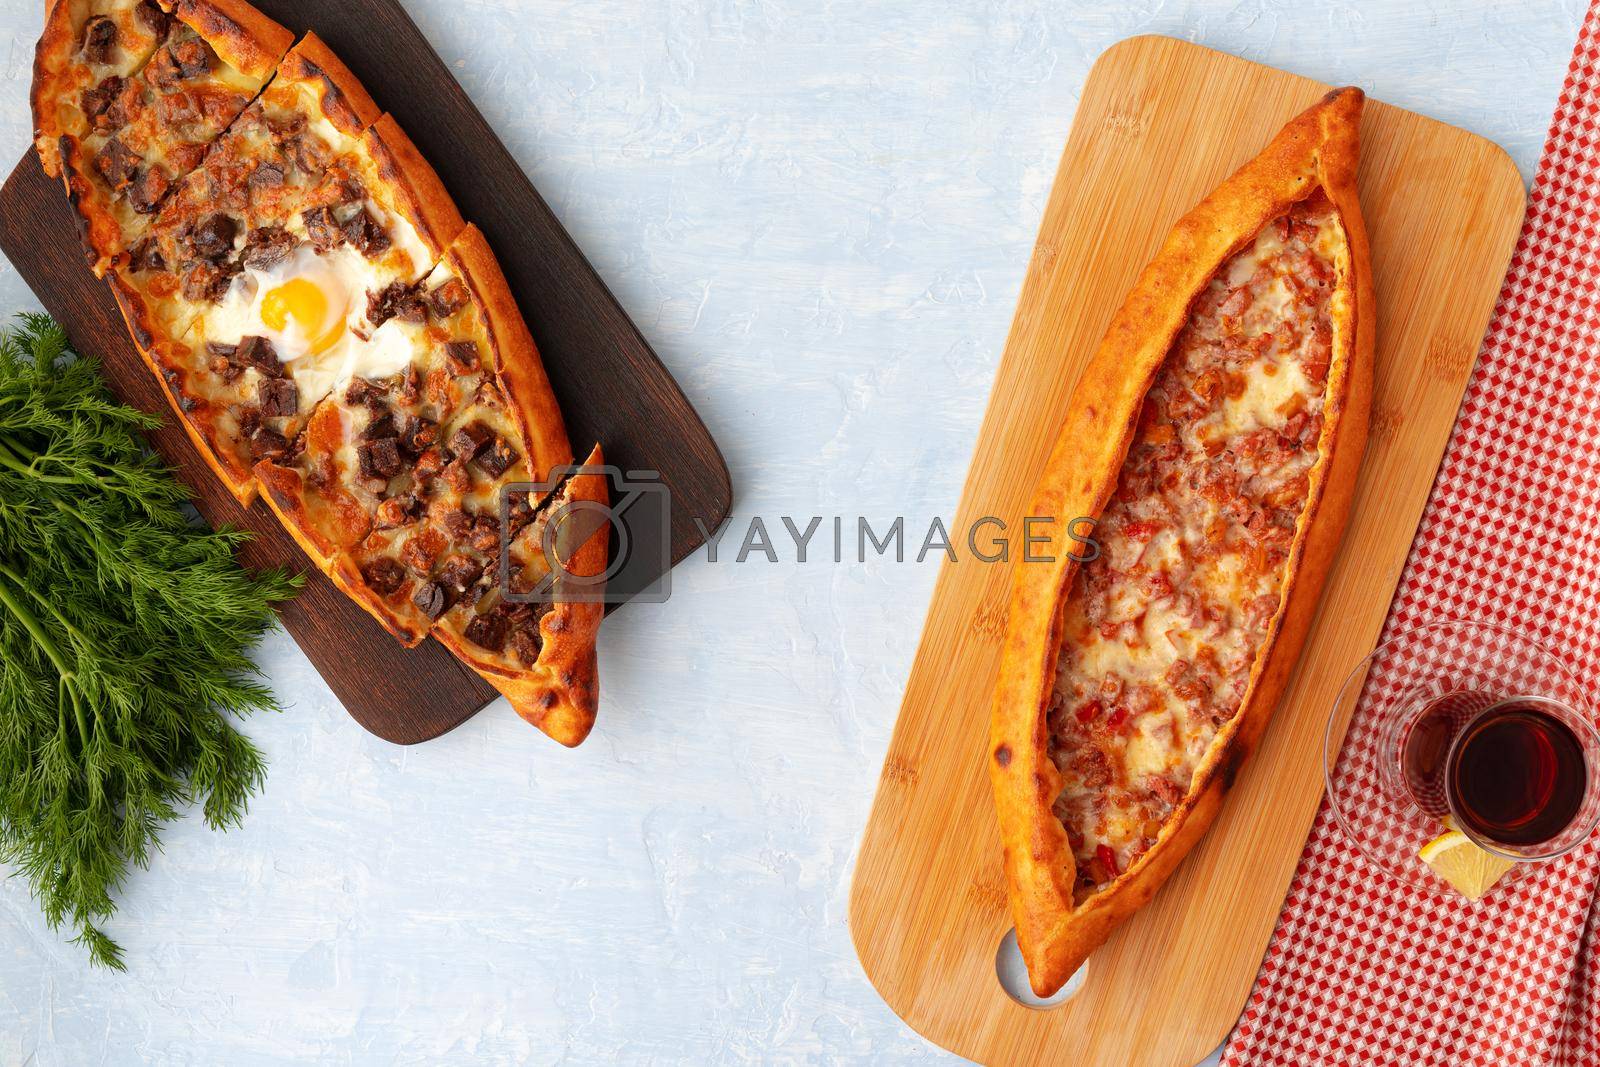 Royalty free image of Turkish baked Pide bread on light blue wooden surface by Fabrikasimf